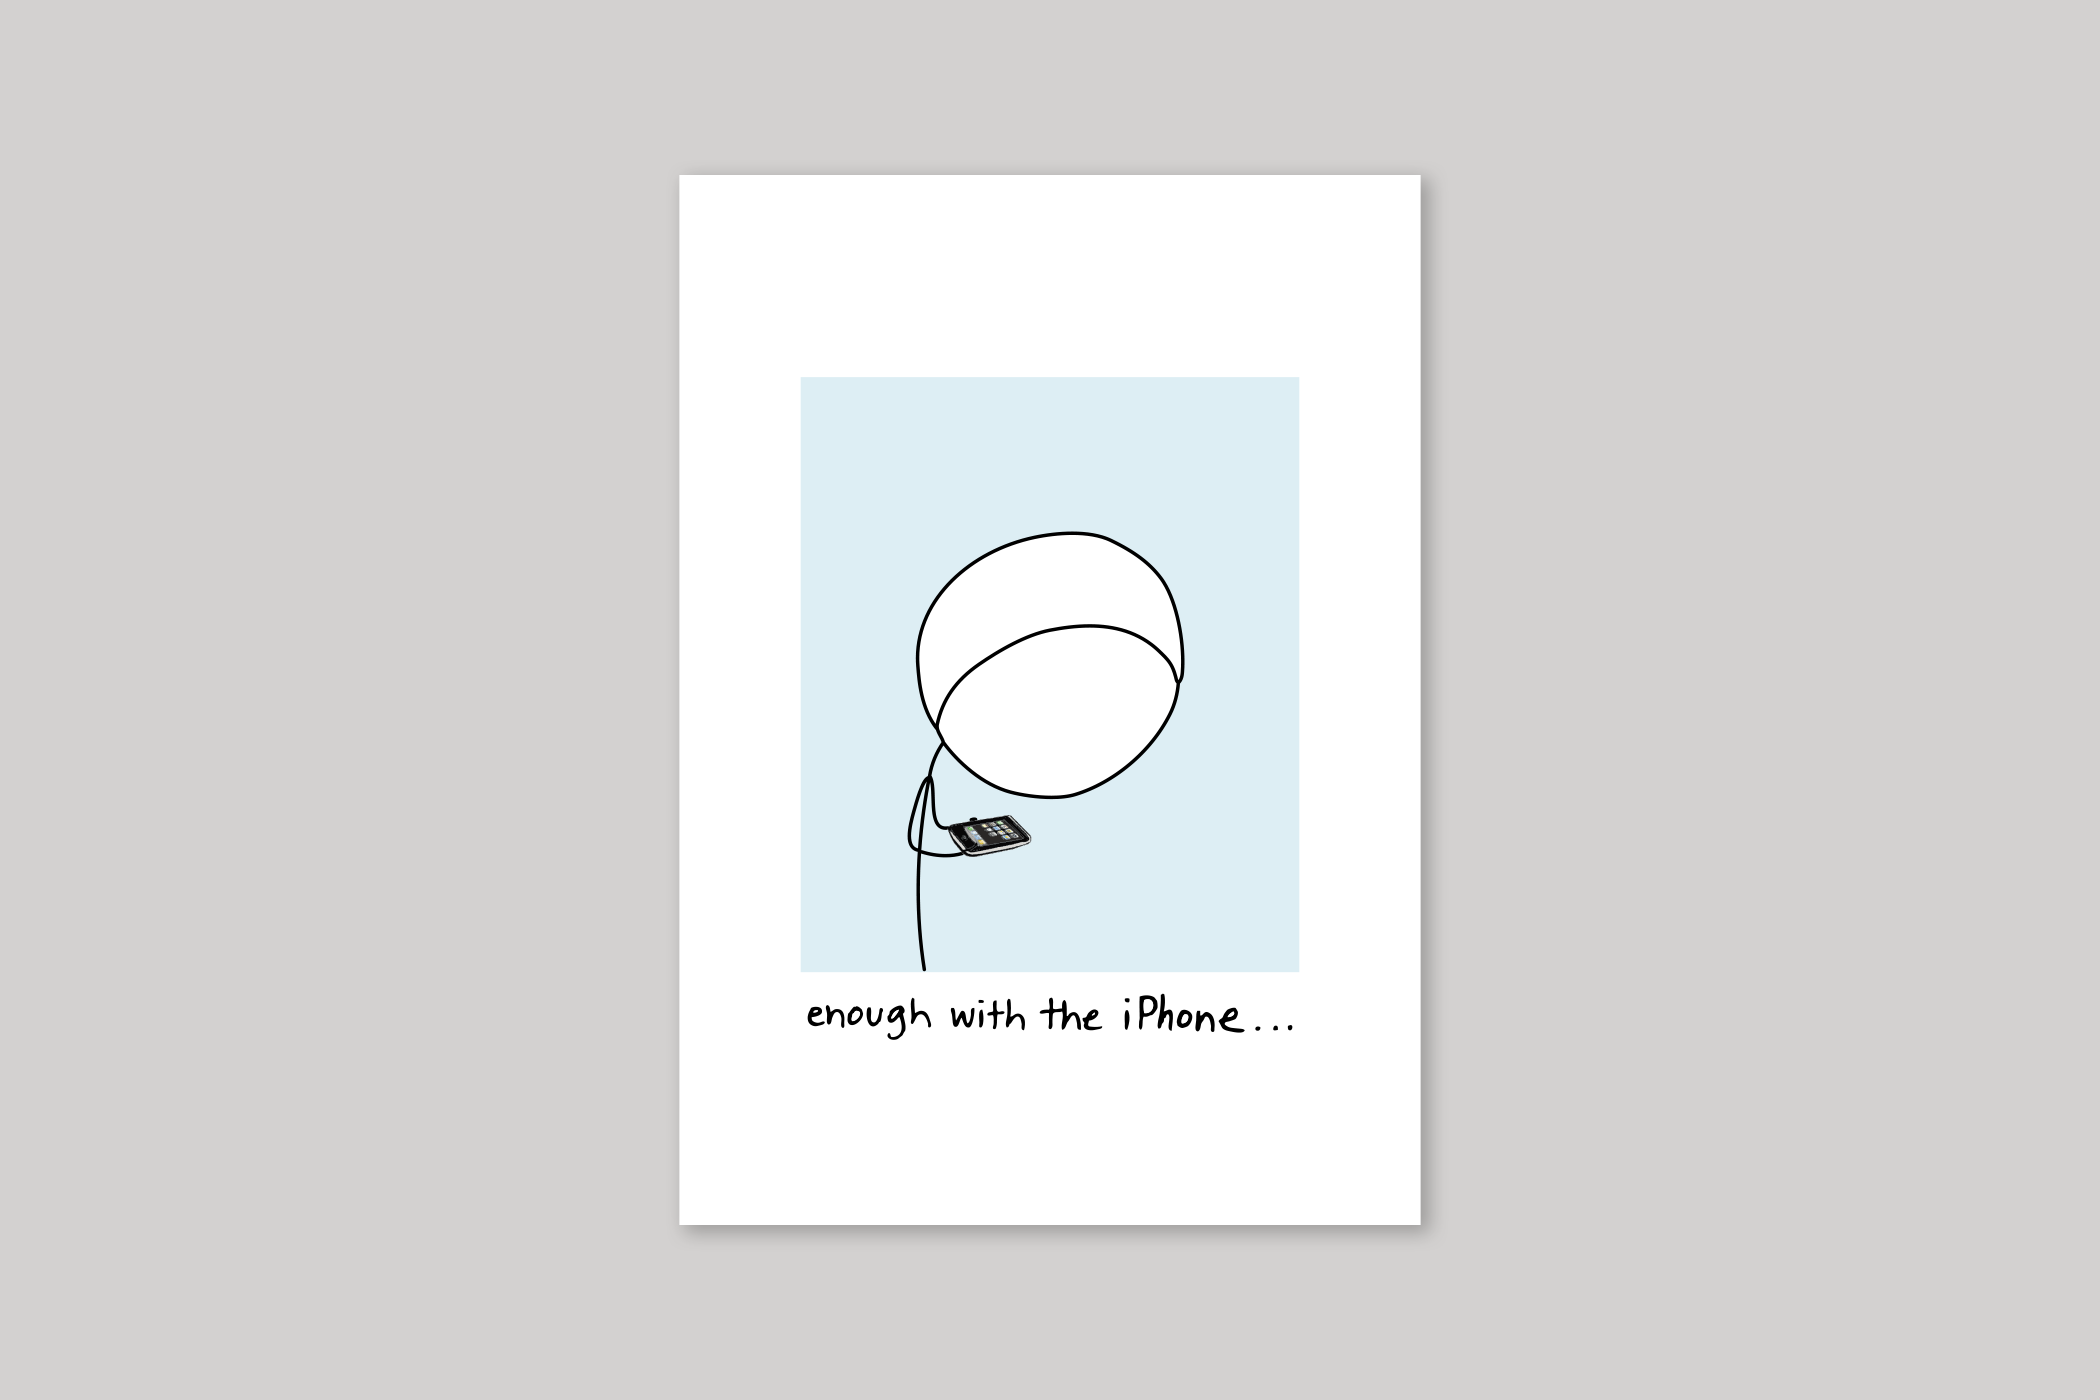 Enough With the iPhone humorous illustration from Mean Cards range of greeting cards by Icon.